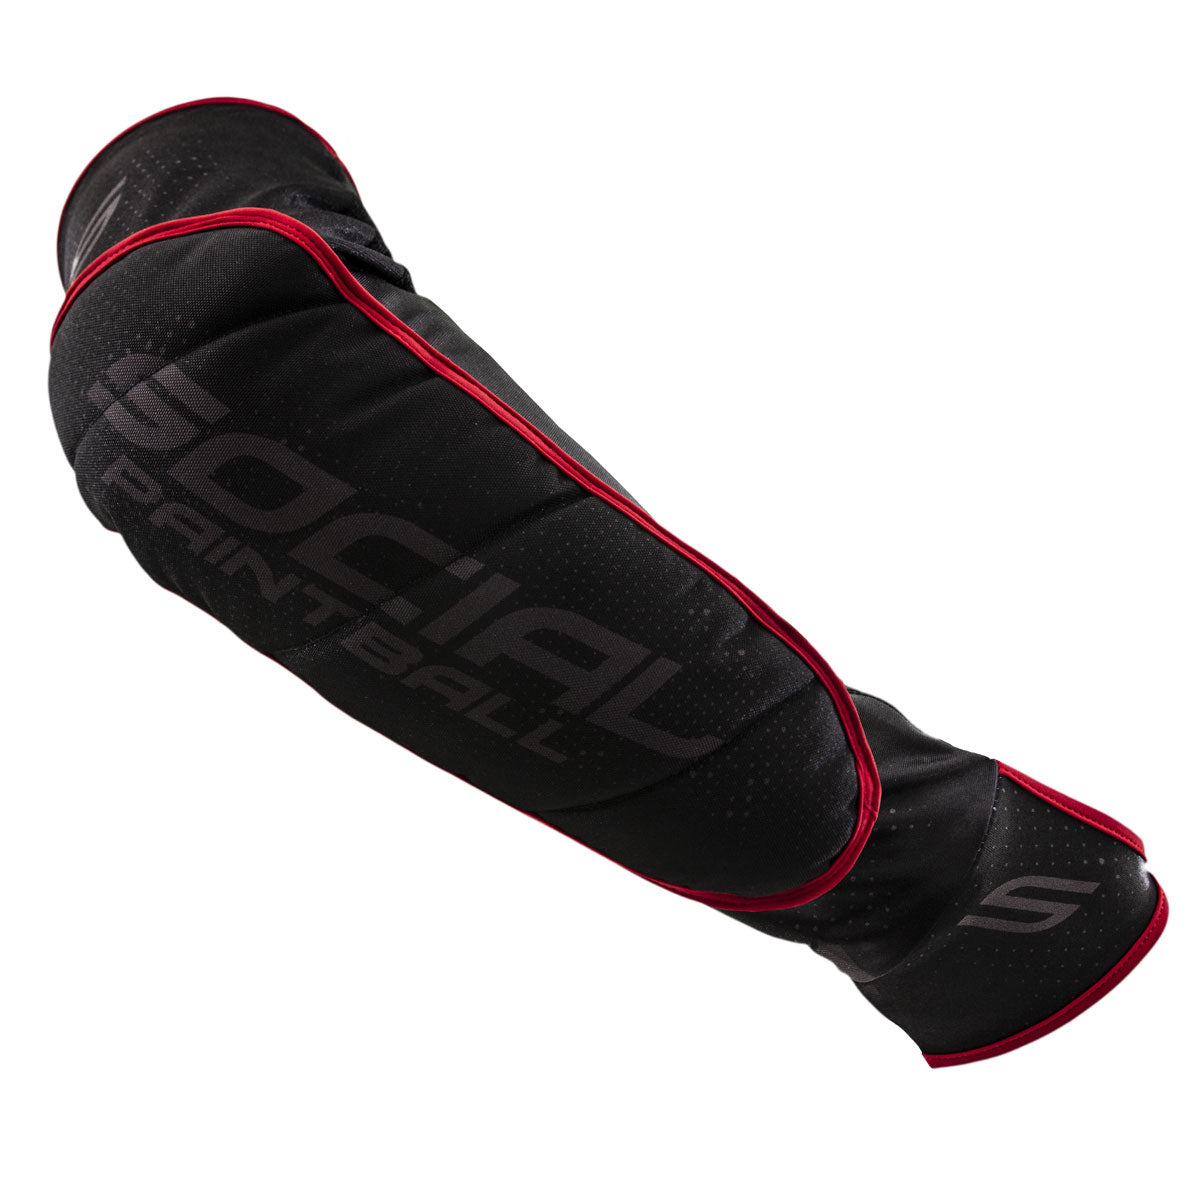 Smpl Elbow Pads, Black Red